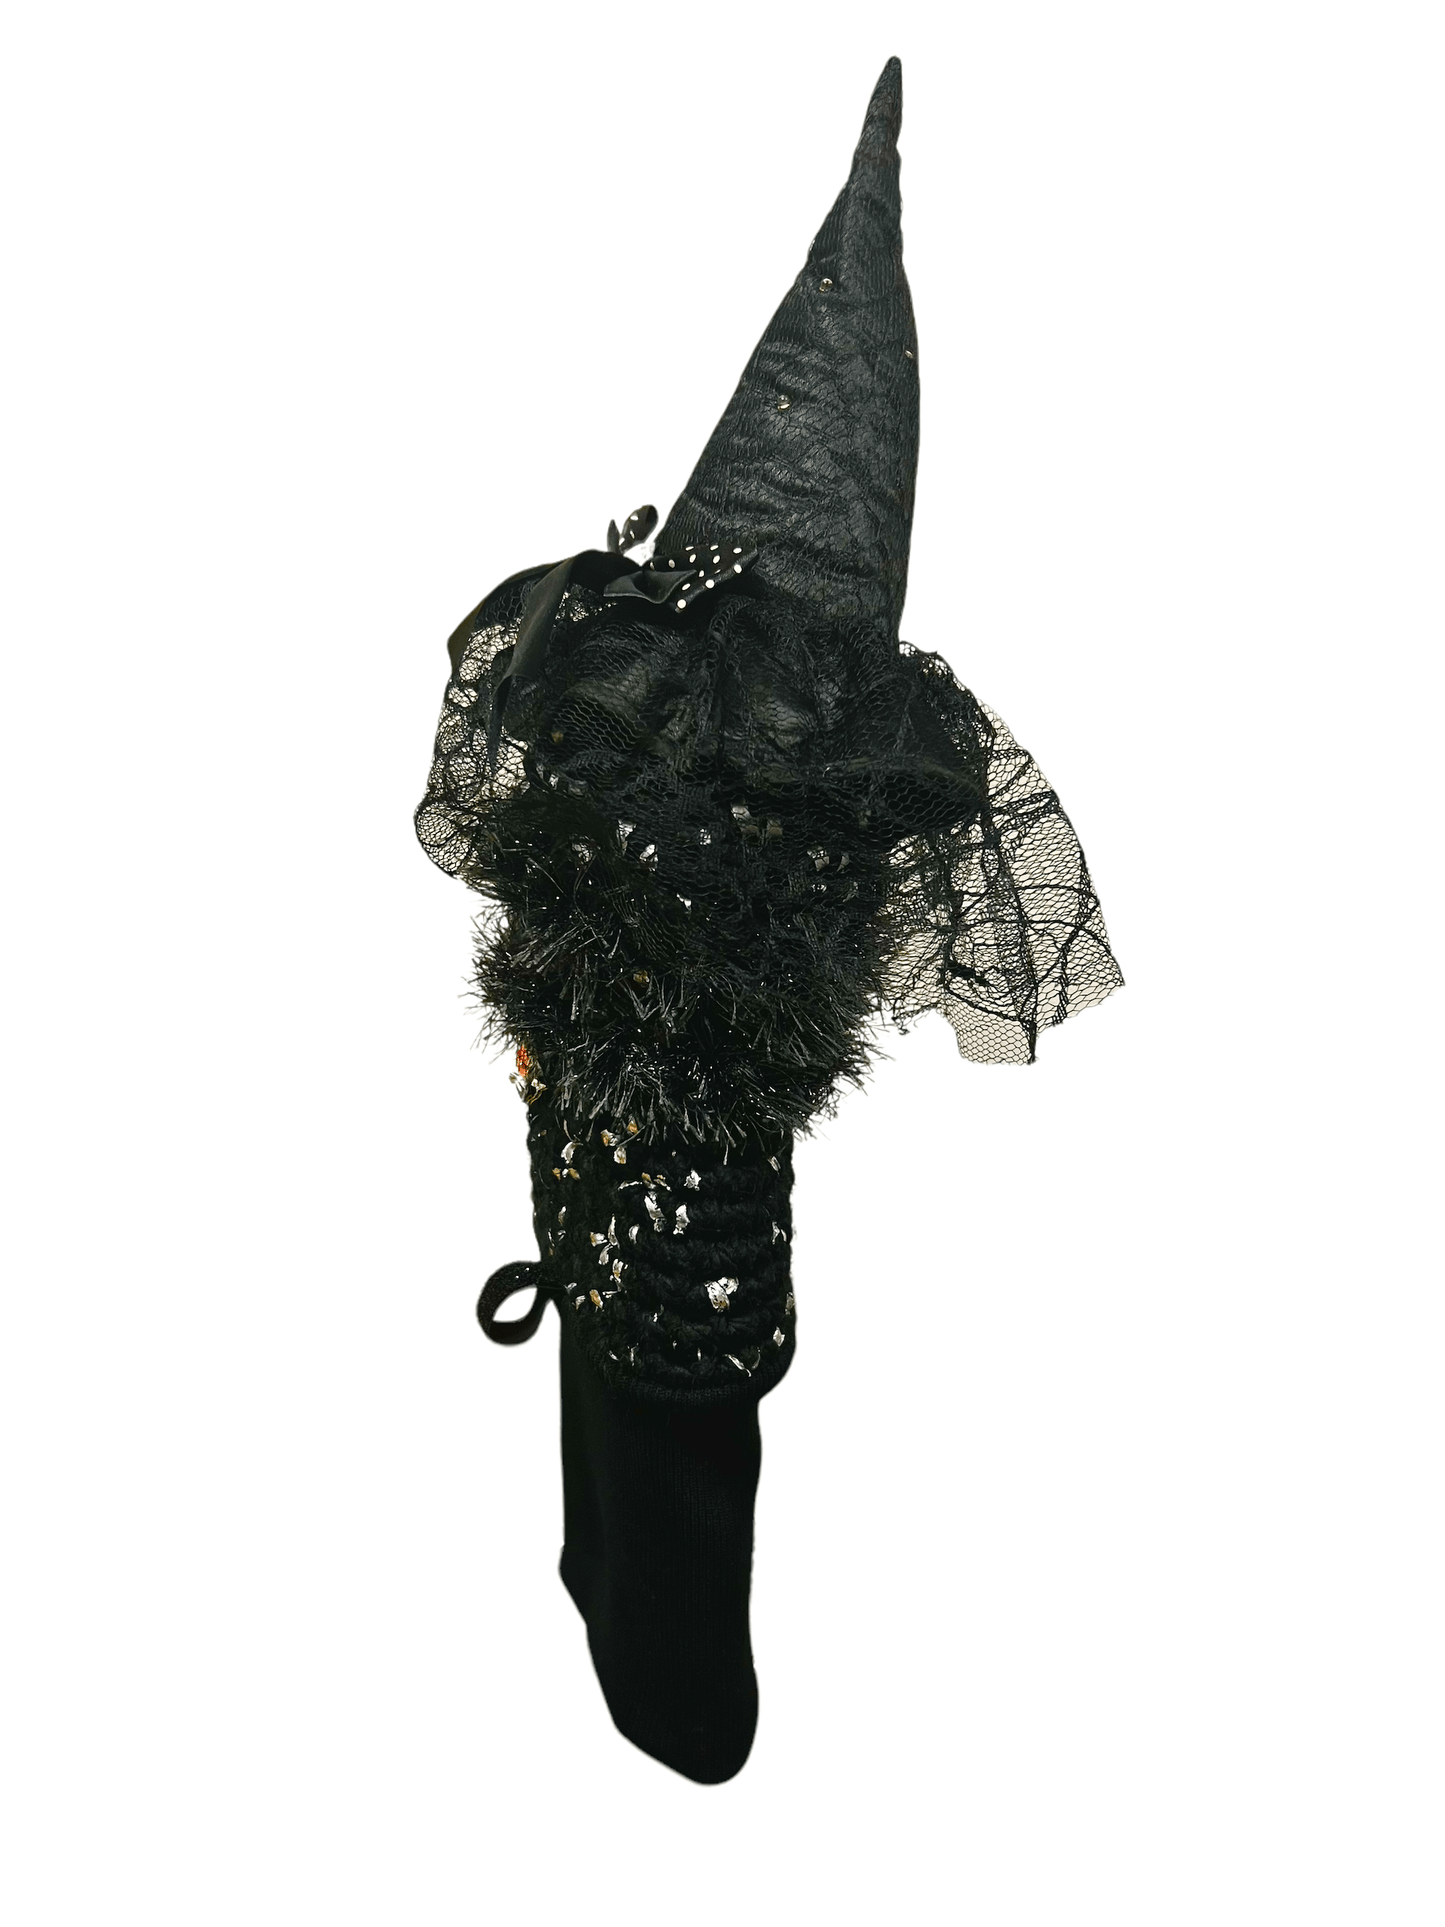 Black body with silver speckles Hat